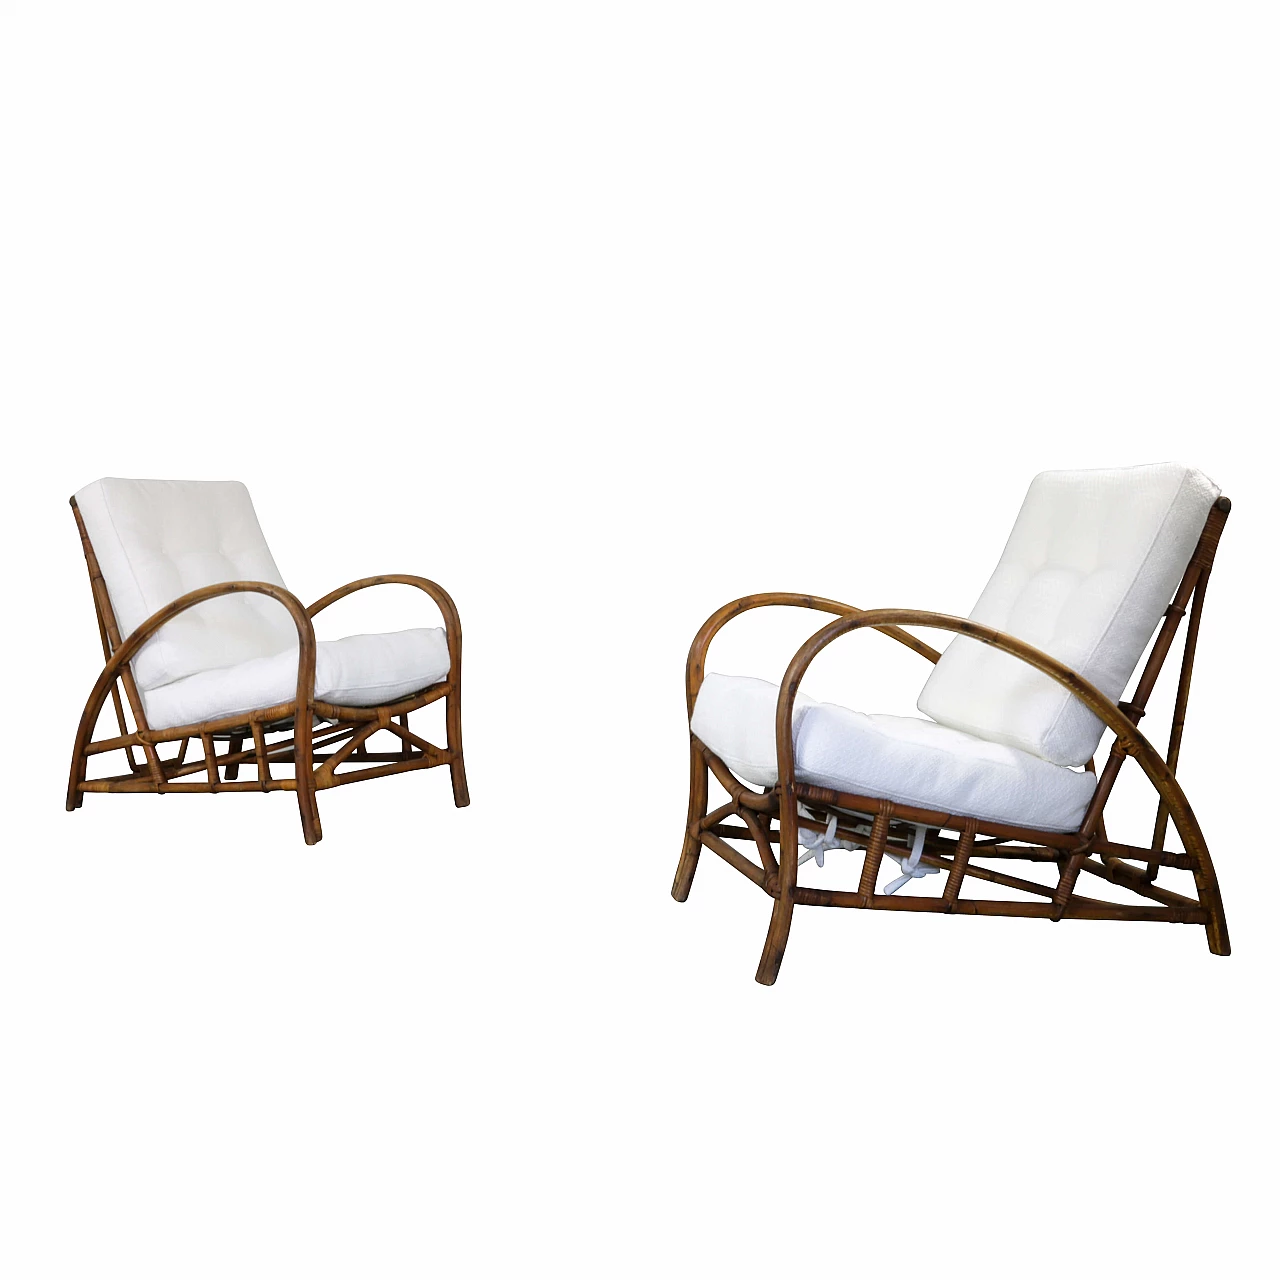 Pair of bamboo armchairs, 1950s 1244492